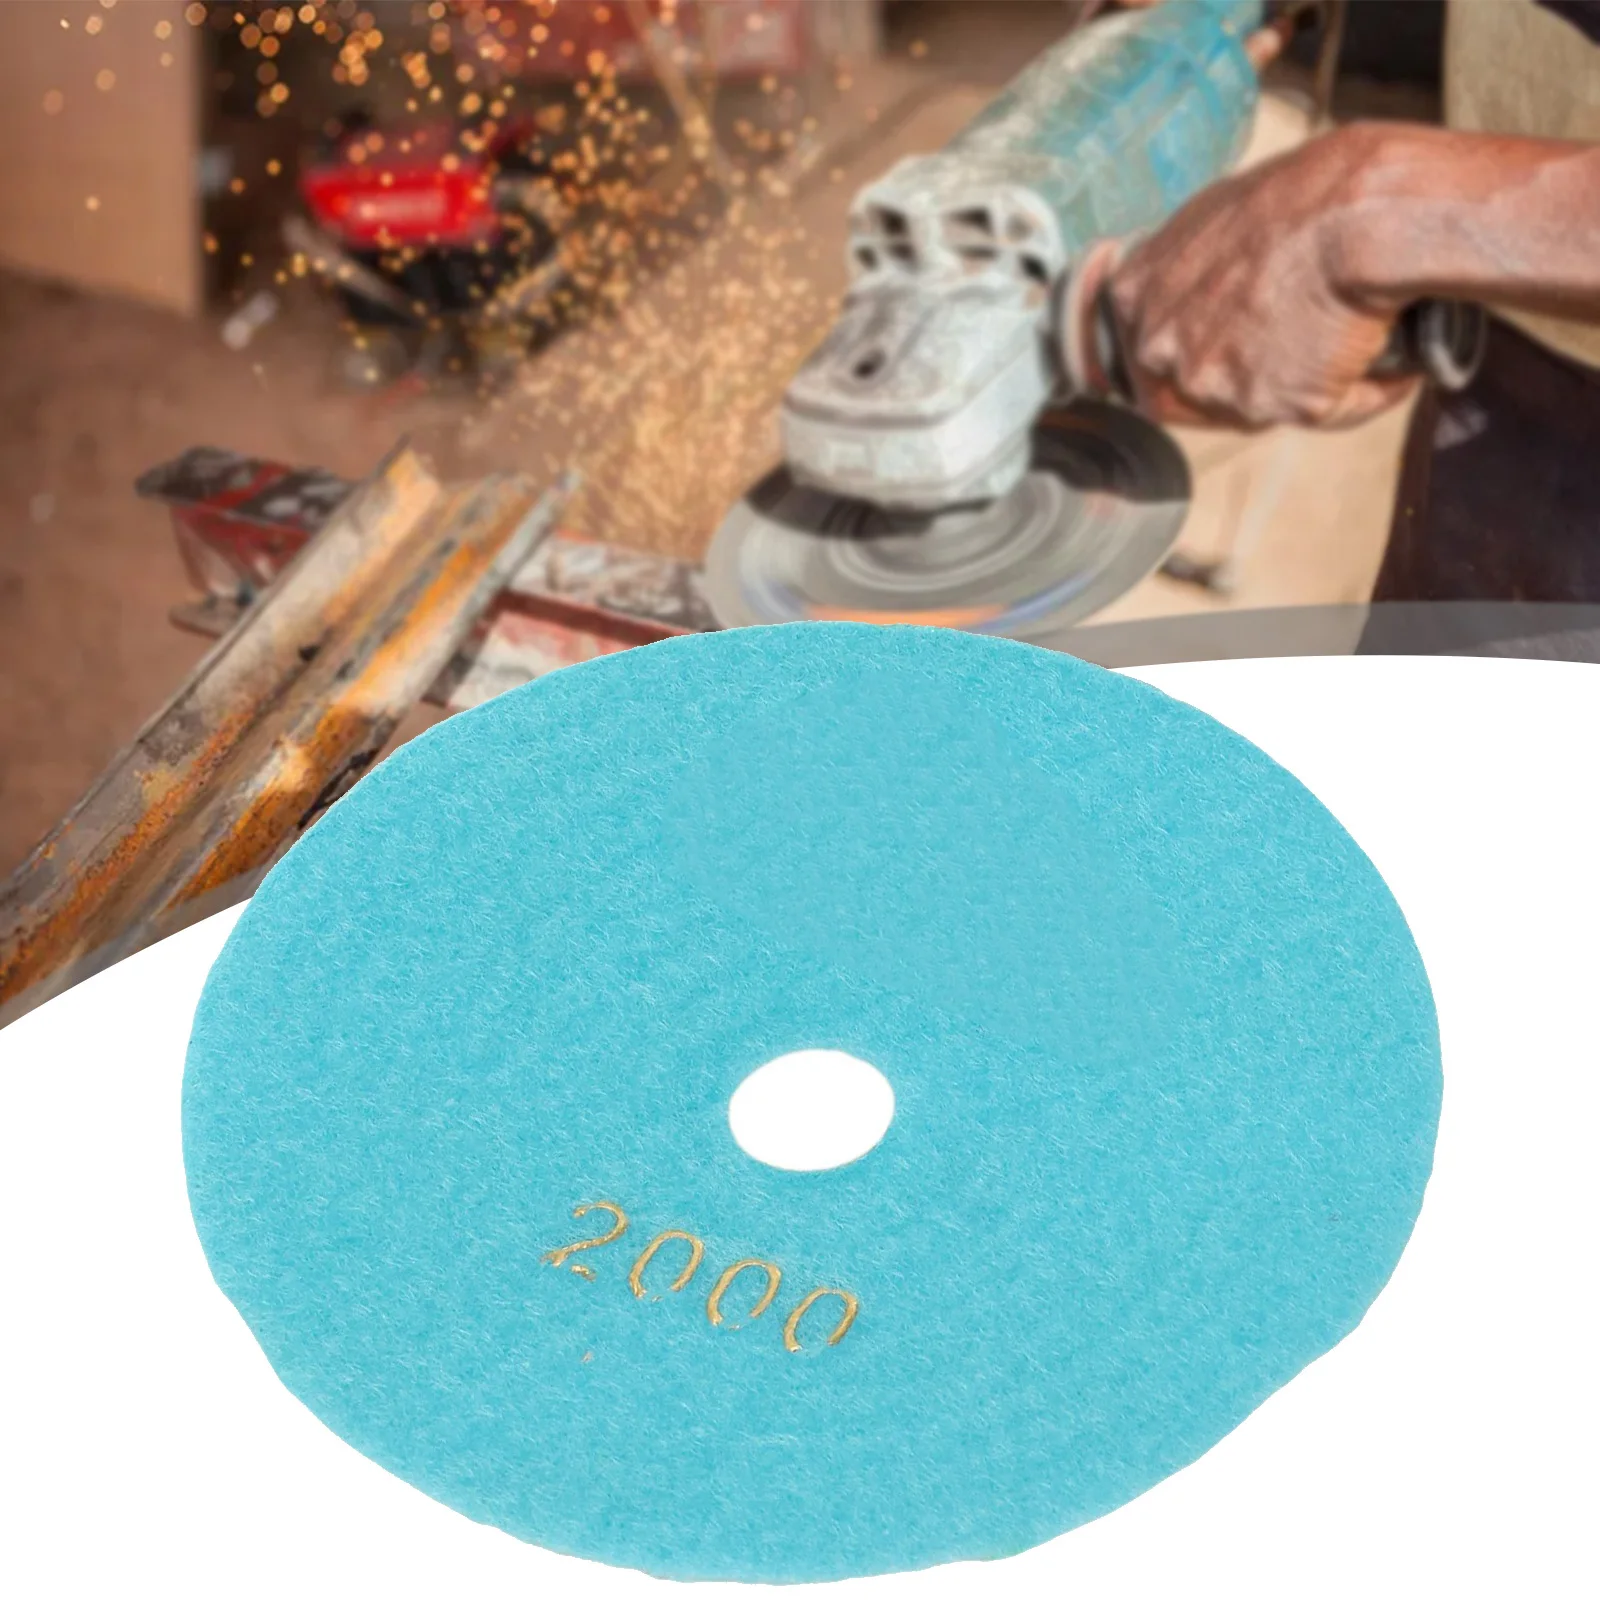 5 Inch 125mm Dry/Wet Diamond Polishing Pads Flexible Grinding Discs For Granite ,concrete,marble,limestone Fast Polishing 2024 breastfeeding undershirt underwear flexible fabric high performance and special design sports bra for active mother women 2024 100% organic turkish production comfort support performance ease of feeding freedom of move